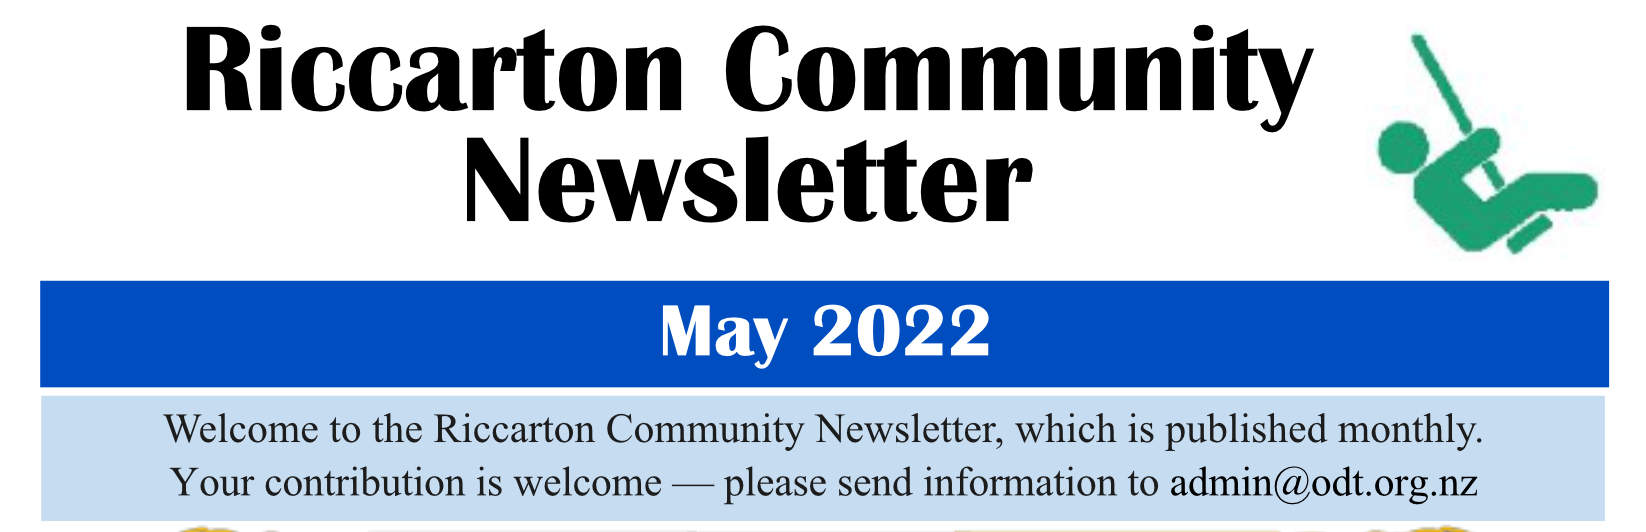 RC Newsletter May 2022 masthead